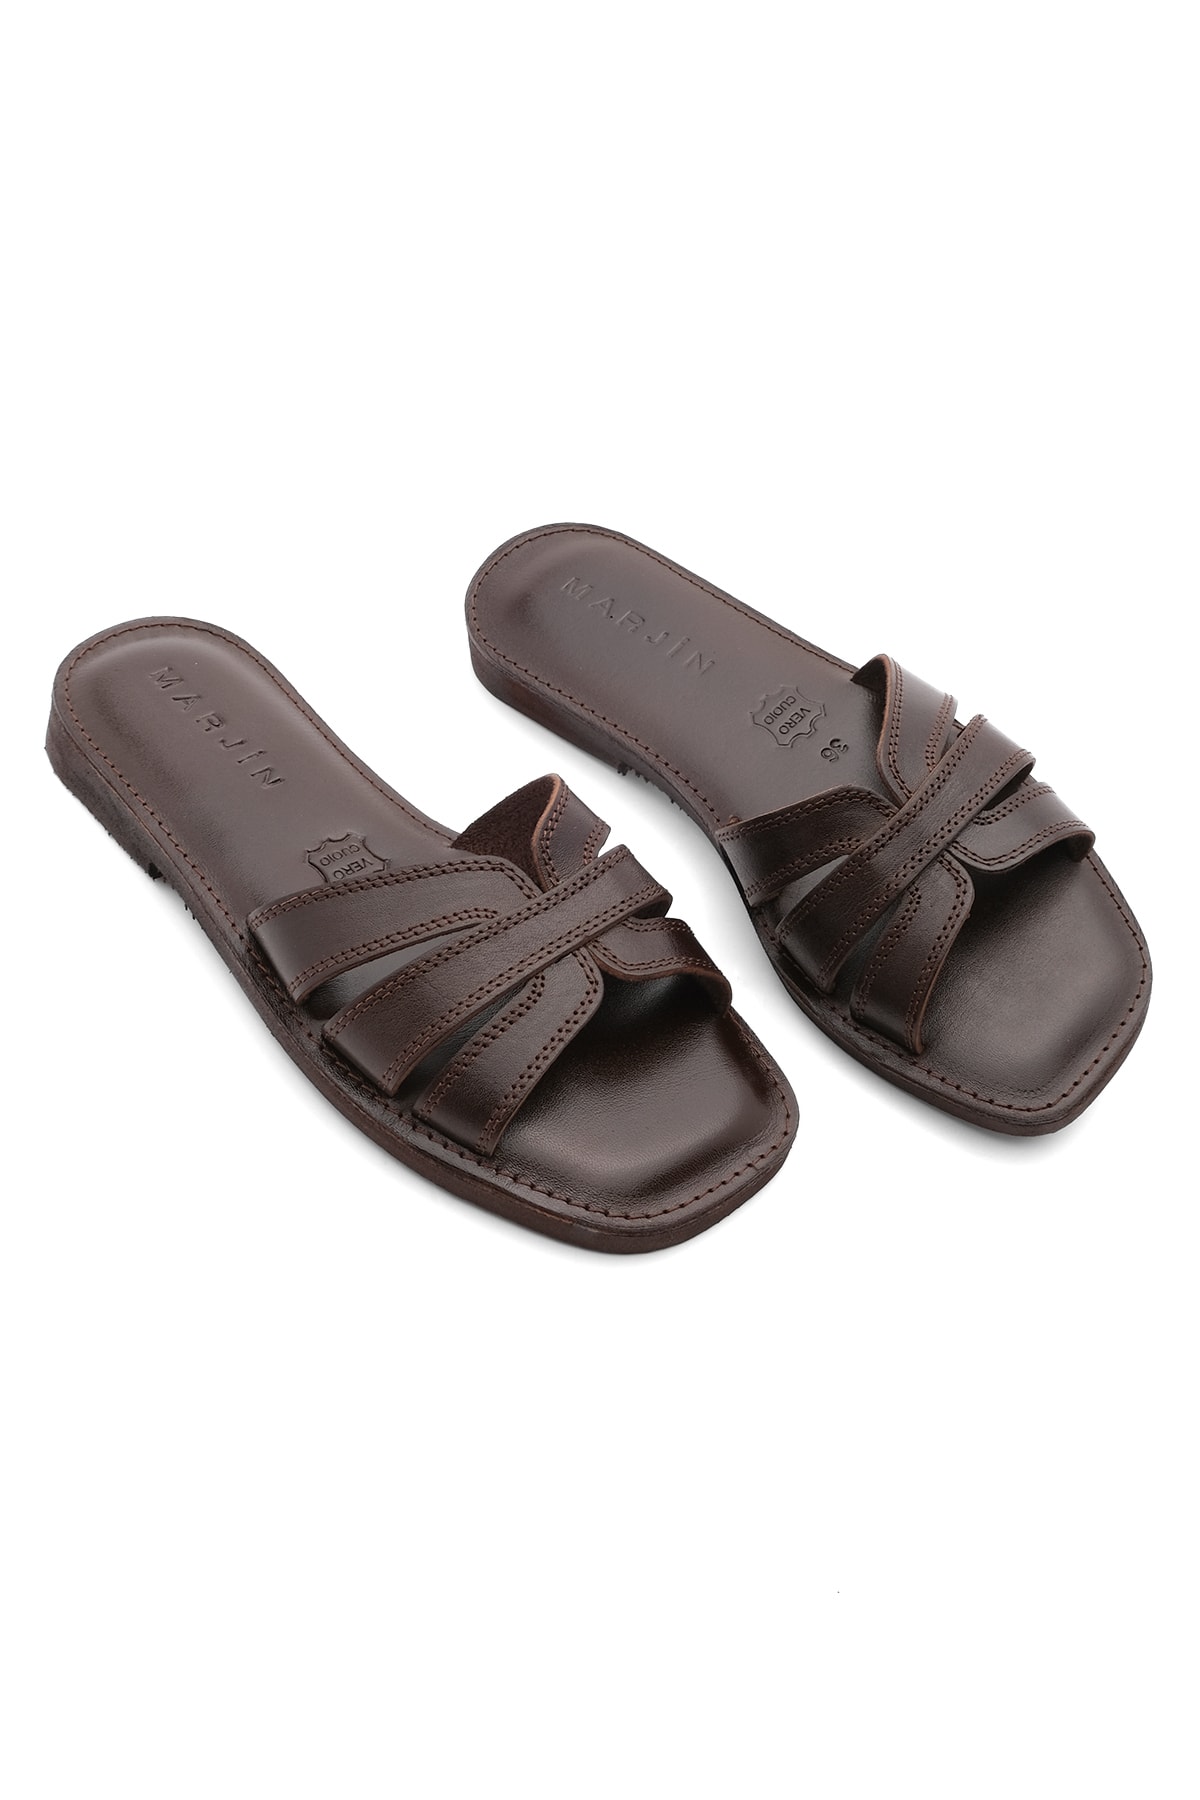 Levně Marjin Women's Genuine Leather with Eva Sole. Daily Slippers. Generic Brown.